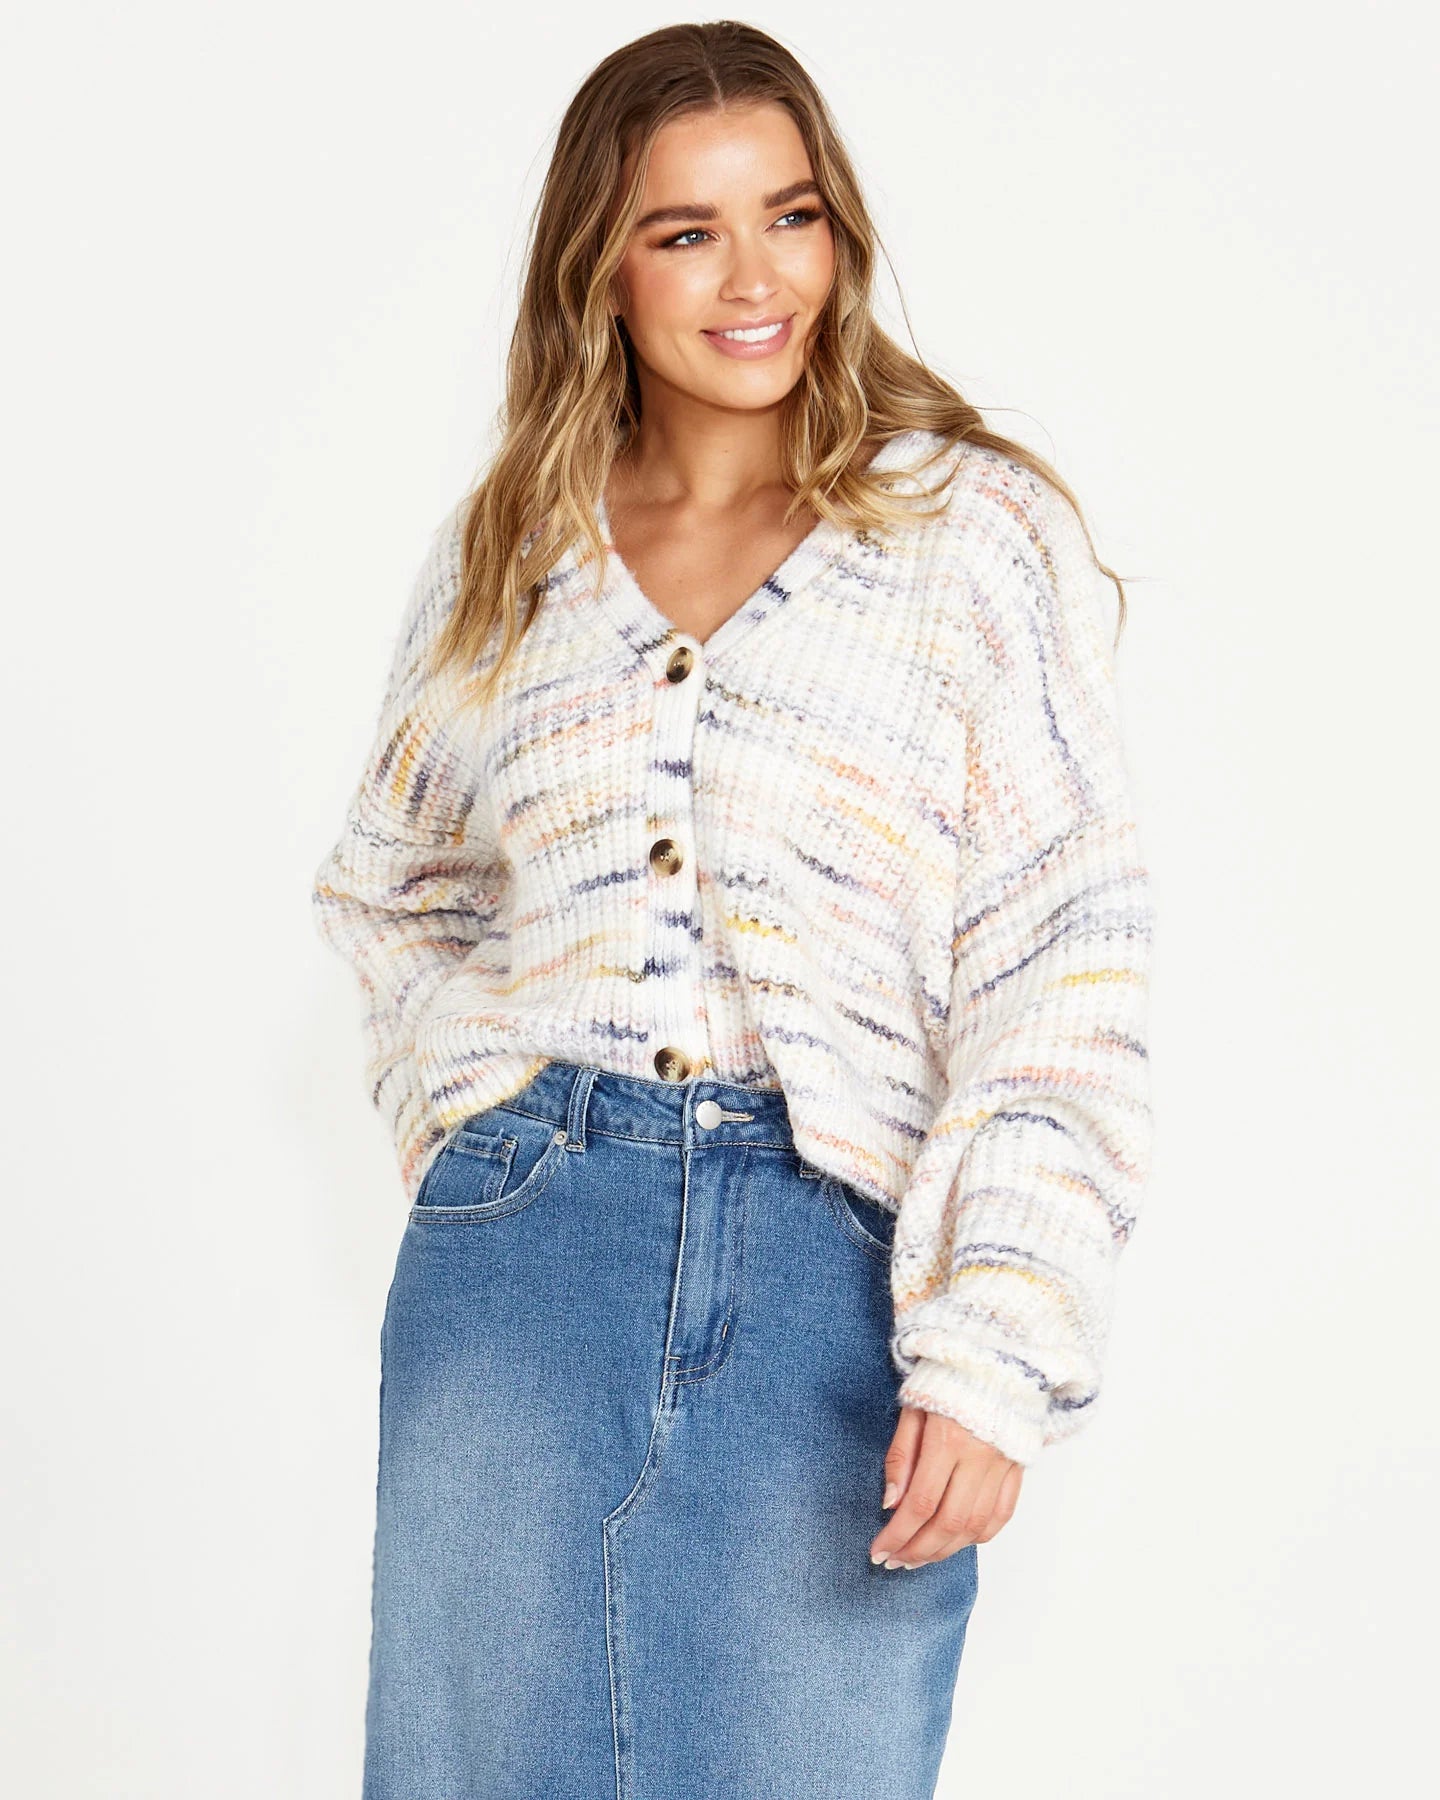 Sass - Pepper Space Oversized Button Up Wool-Blend Cardi - Cream Rainbow Marle